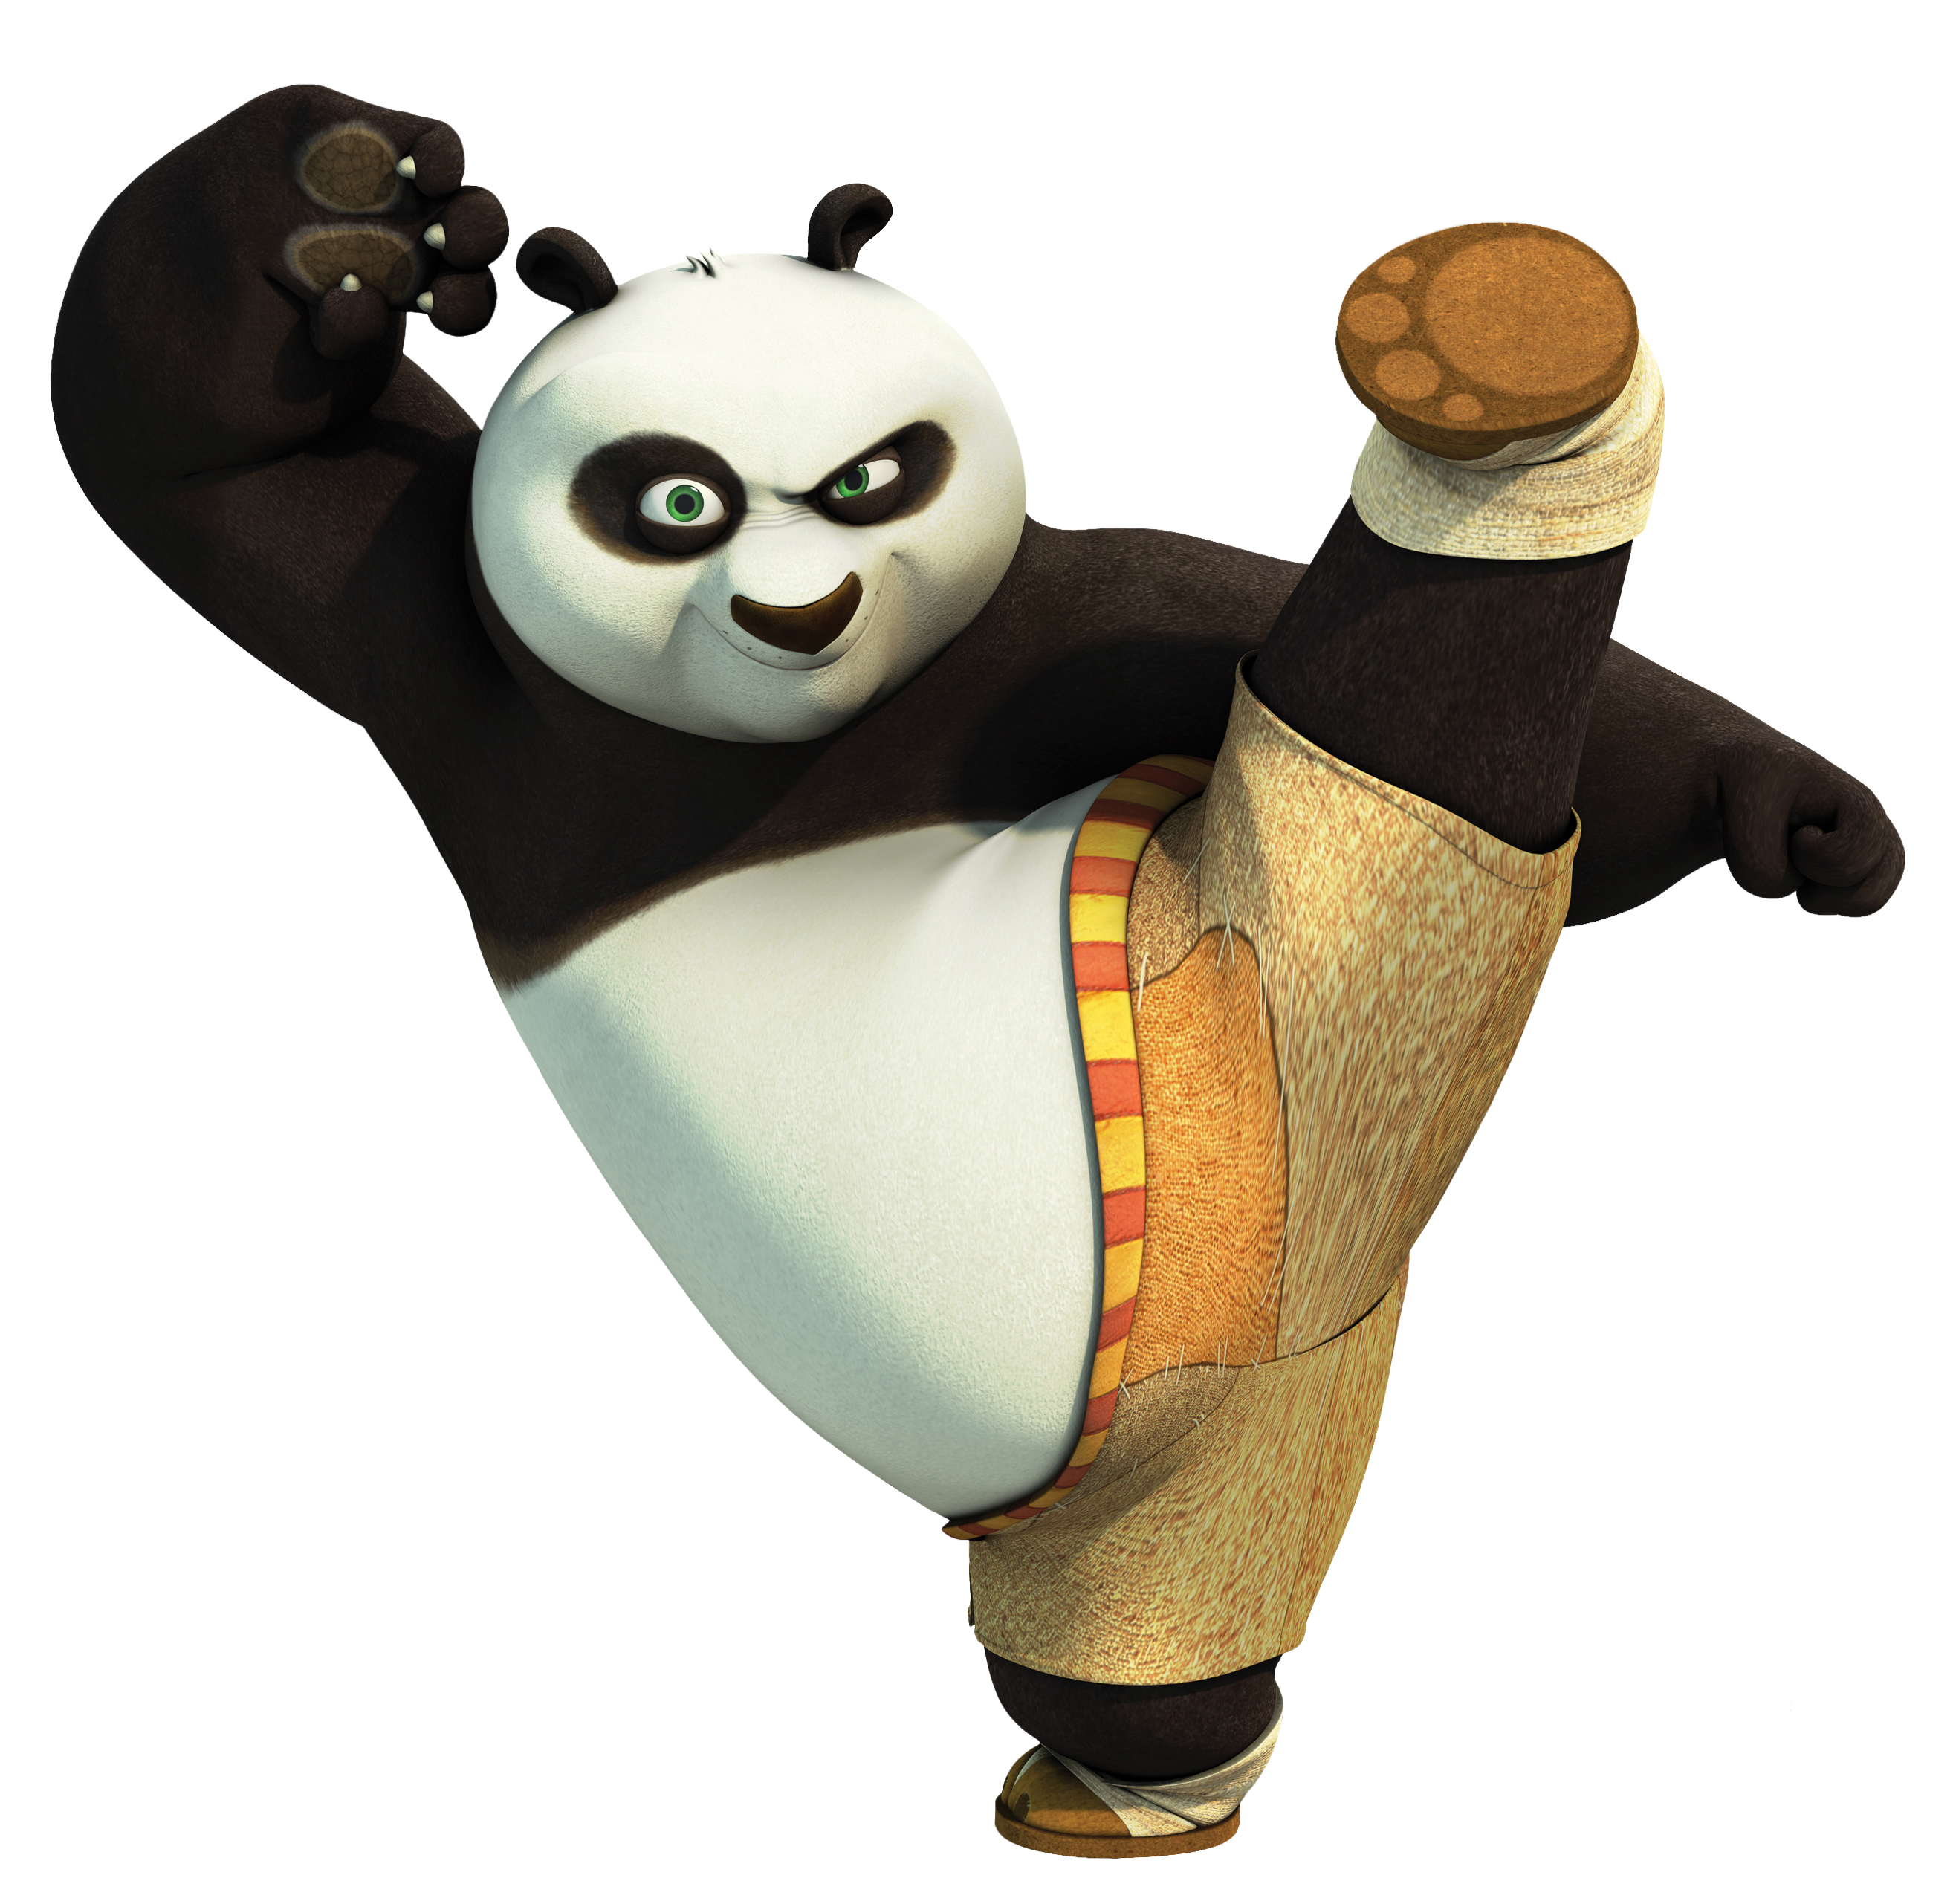 Transparent Kung Fu Panda Png Clip Art Image Gallery Yopriceville High Quality Images And Transparent Png Free Clipart